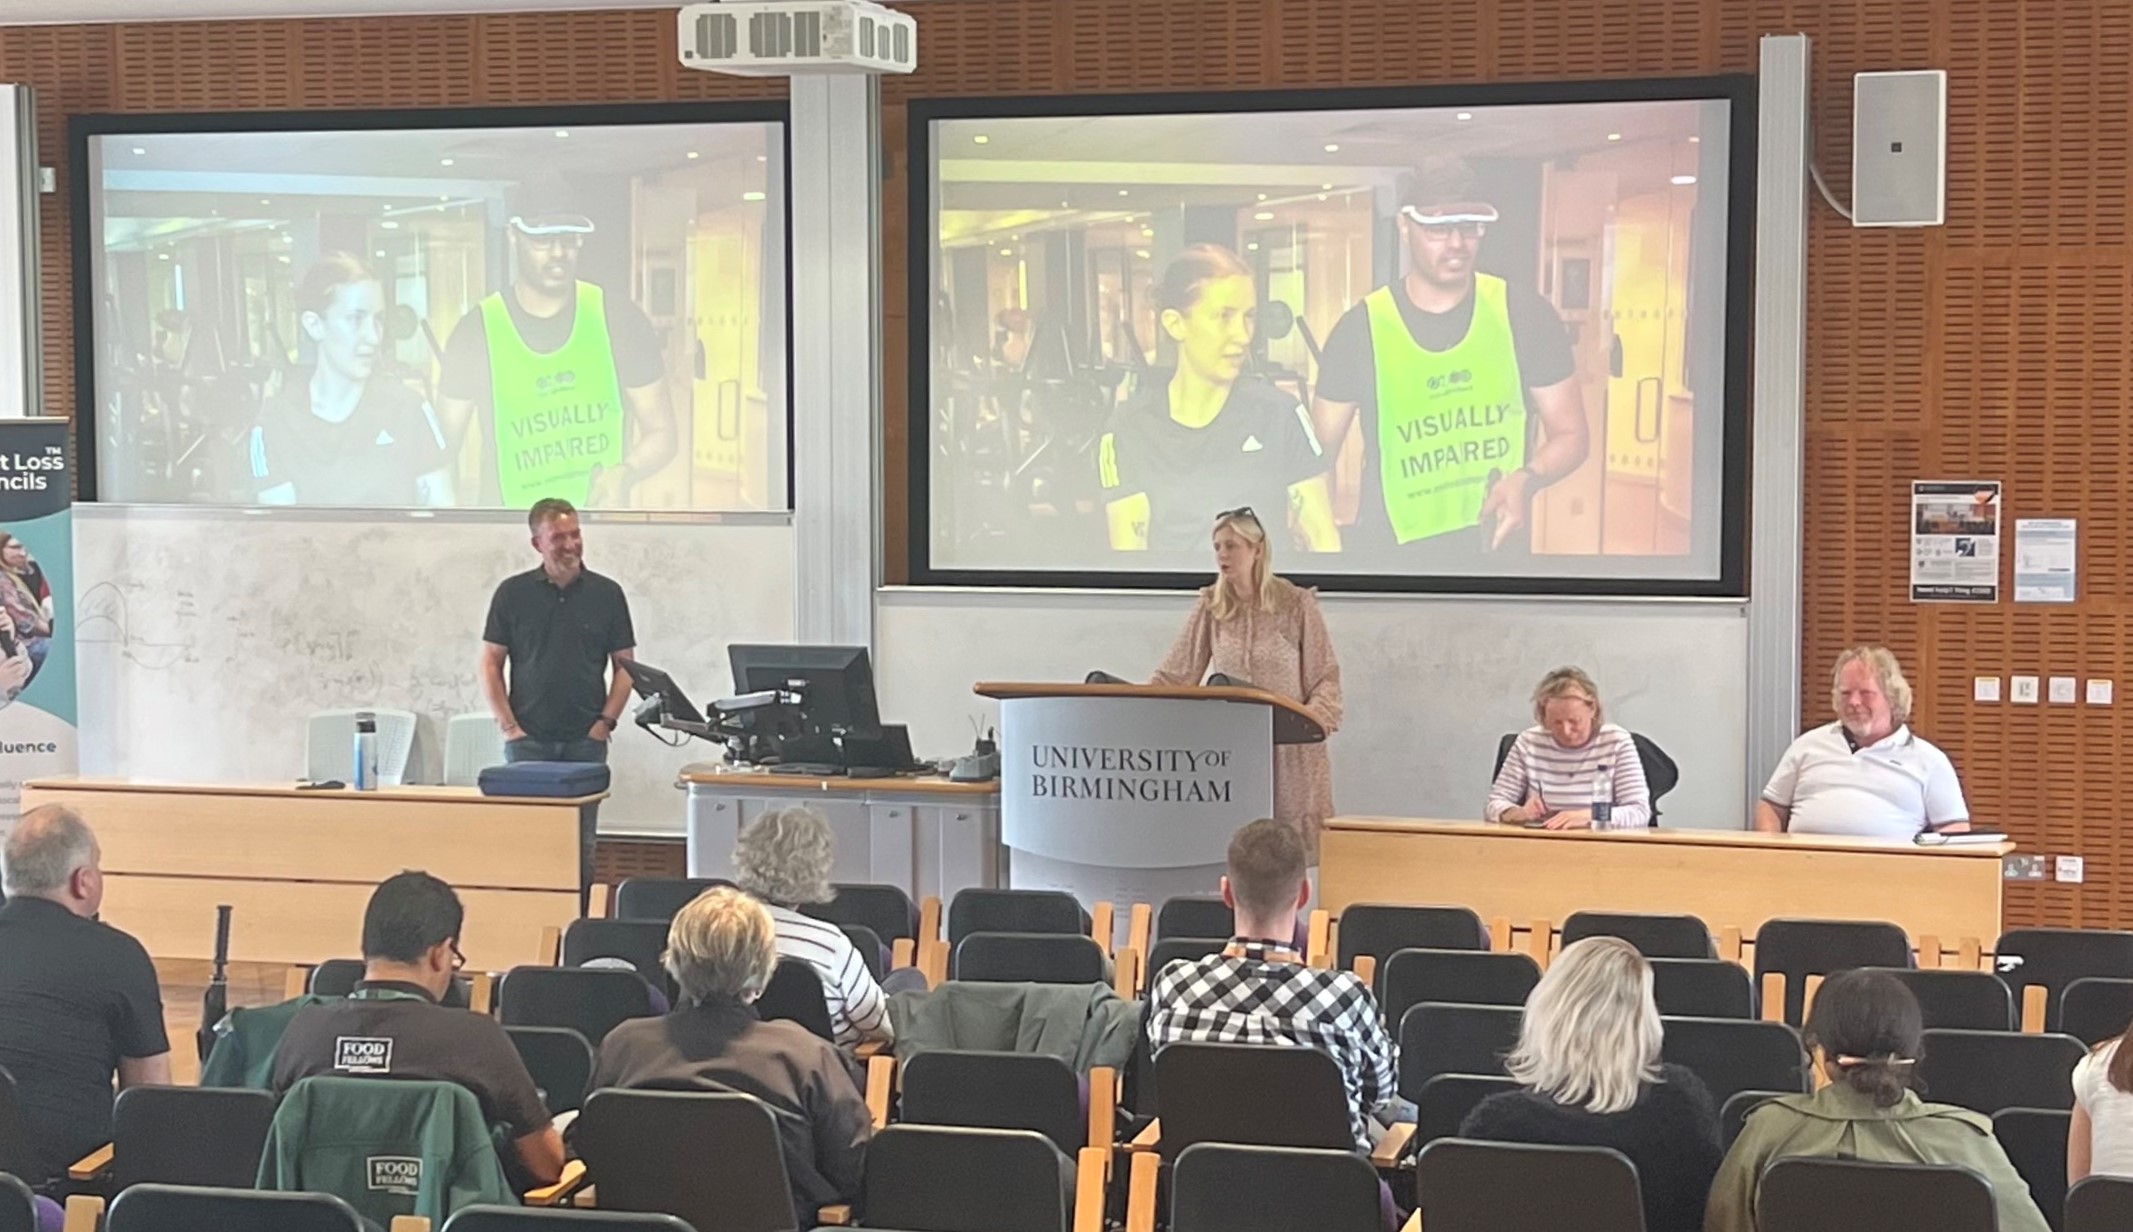 Louise Connop, Senior Engagement Manager for Central England is with Martin Symcox, Head of sport and Leisure at TPT, and SLC members. They are on stage, presenting to university staff.